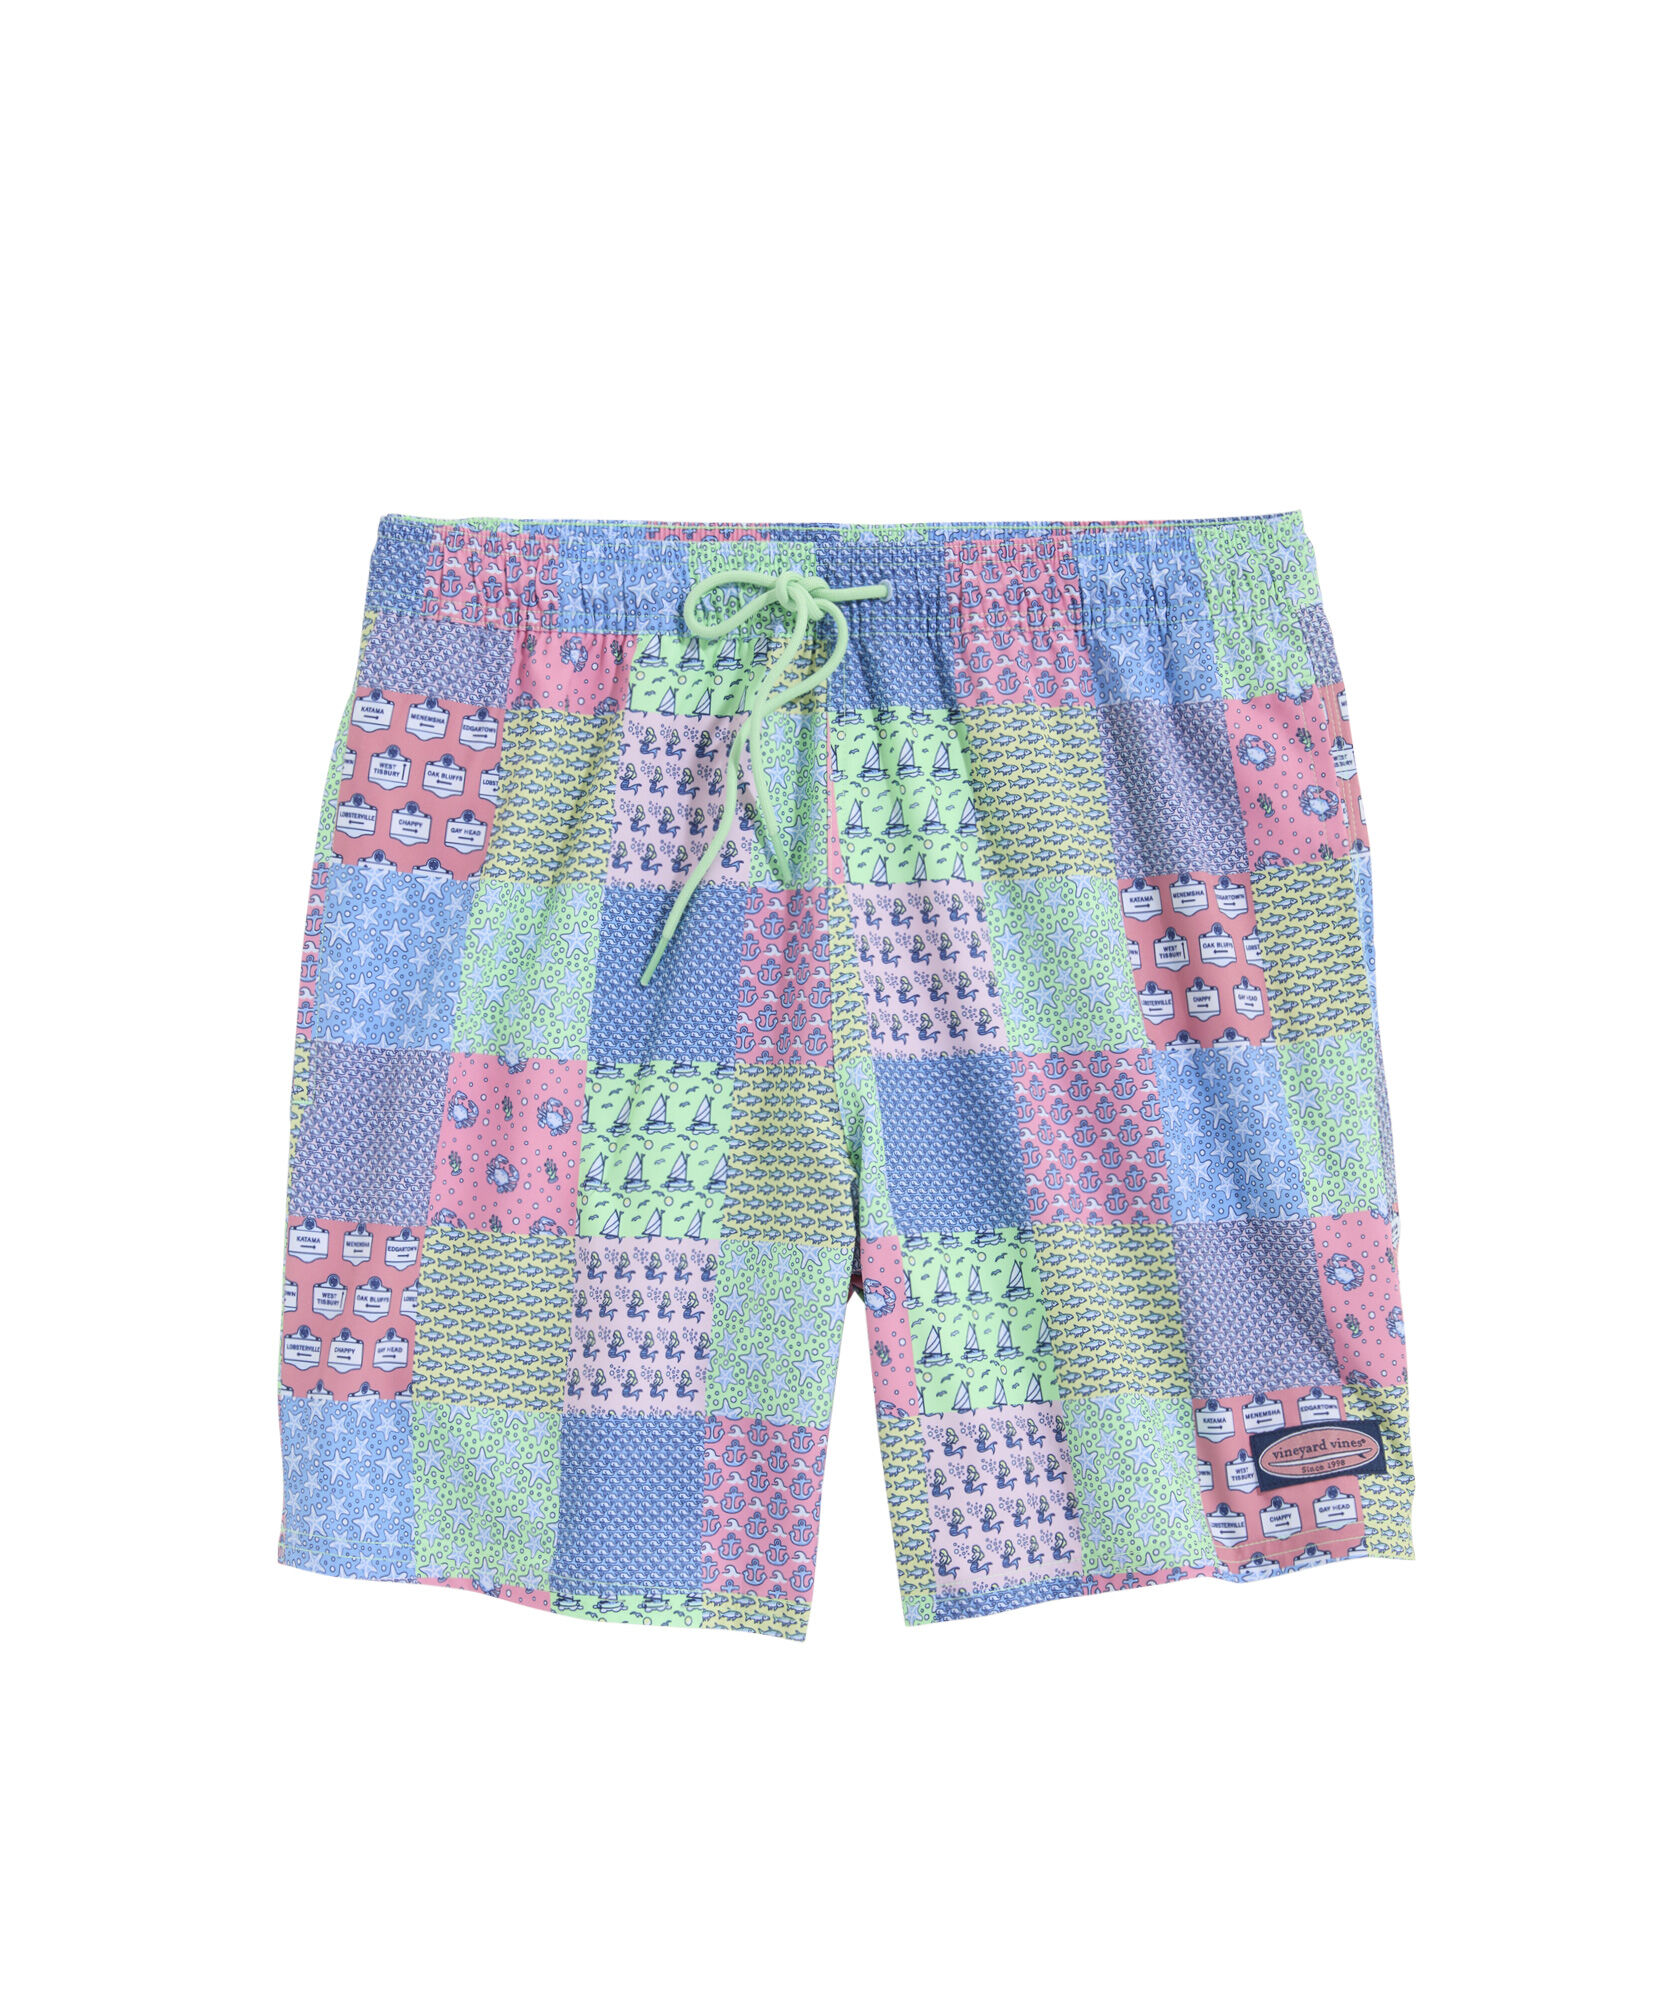 OUTLET Heritage Patchwork Chappy Swim Trunks